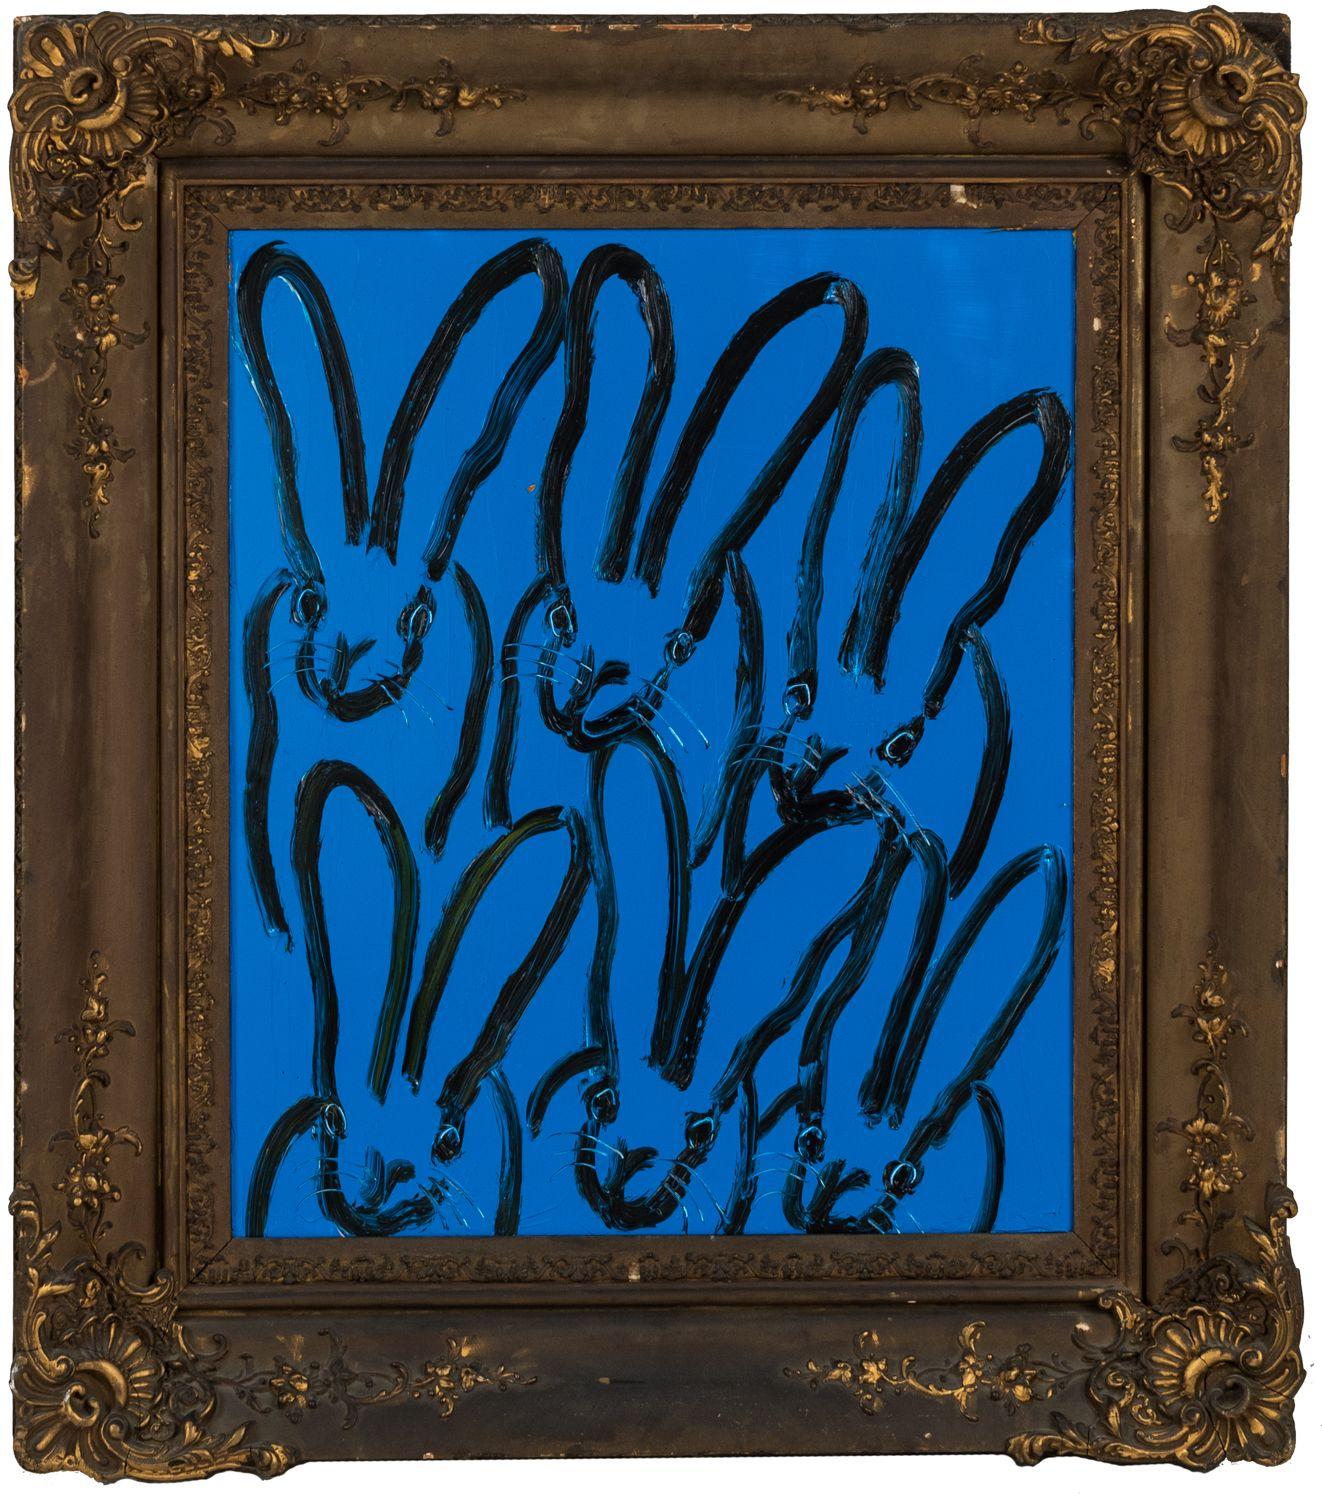 Hunt Slonem Figurative Painting - Sextet Playscape "Bunny Painting" Blue Oil Painting in Ornate Vintage Frame